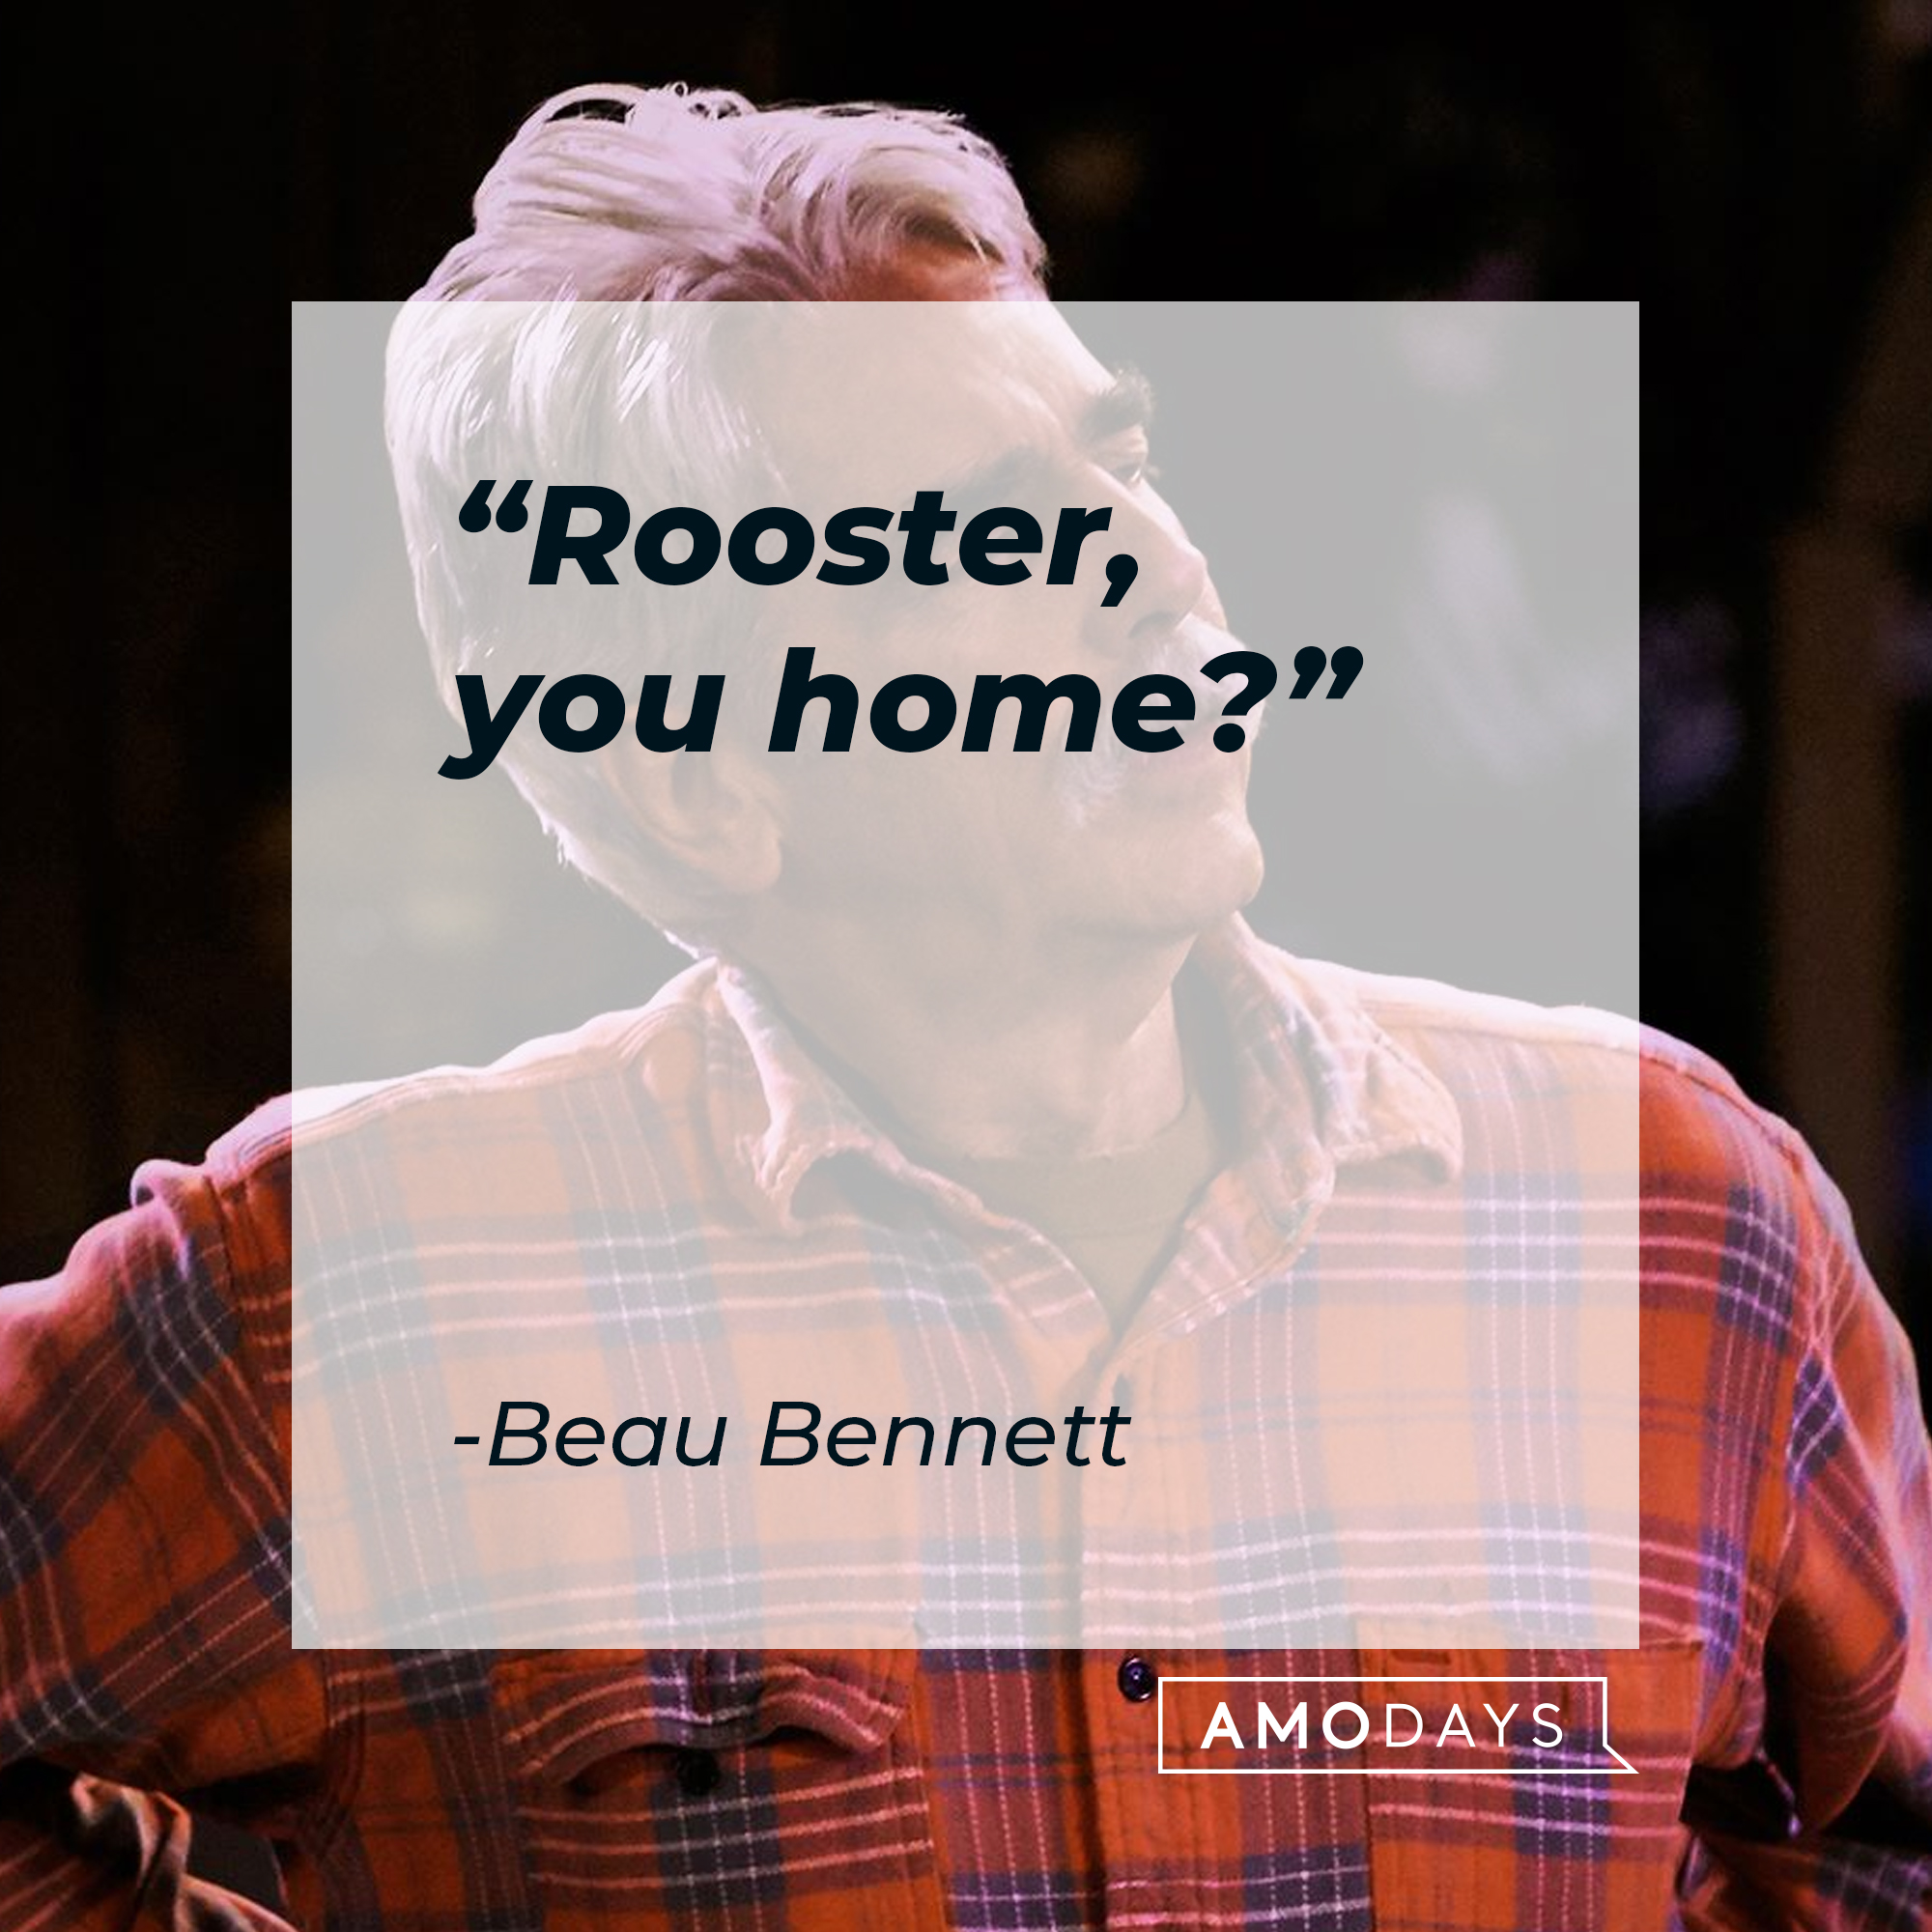 Beau Bennett with his quote: “Rooster, you home?”  |Source: facebook.com/TheRanchNetflix